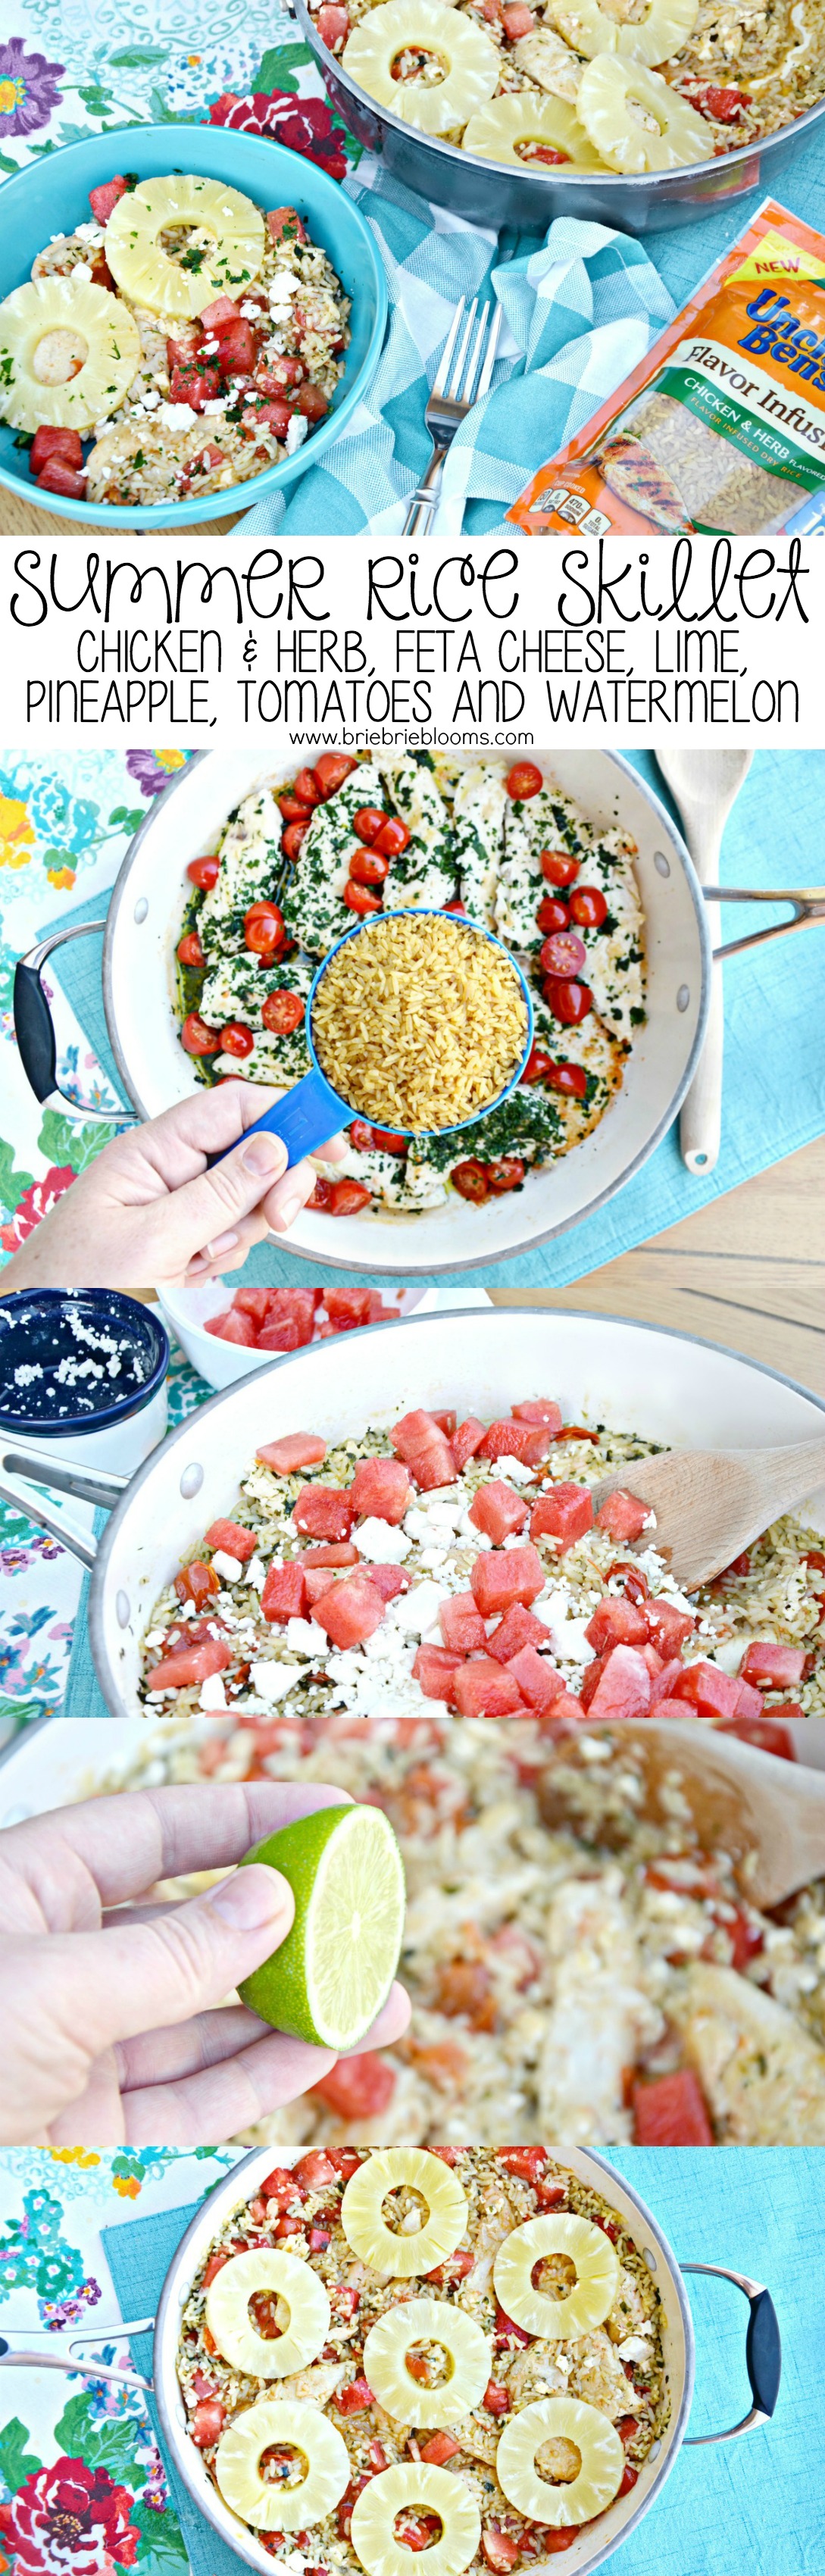 Make this easy chicken & herb summer rice skillet recipe complimented by feta cheese, lime, pineapple, tomatoes and watermelon for a quick new family favorite.